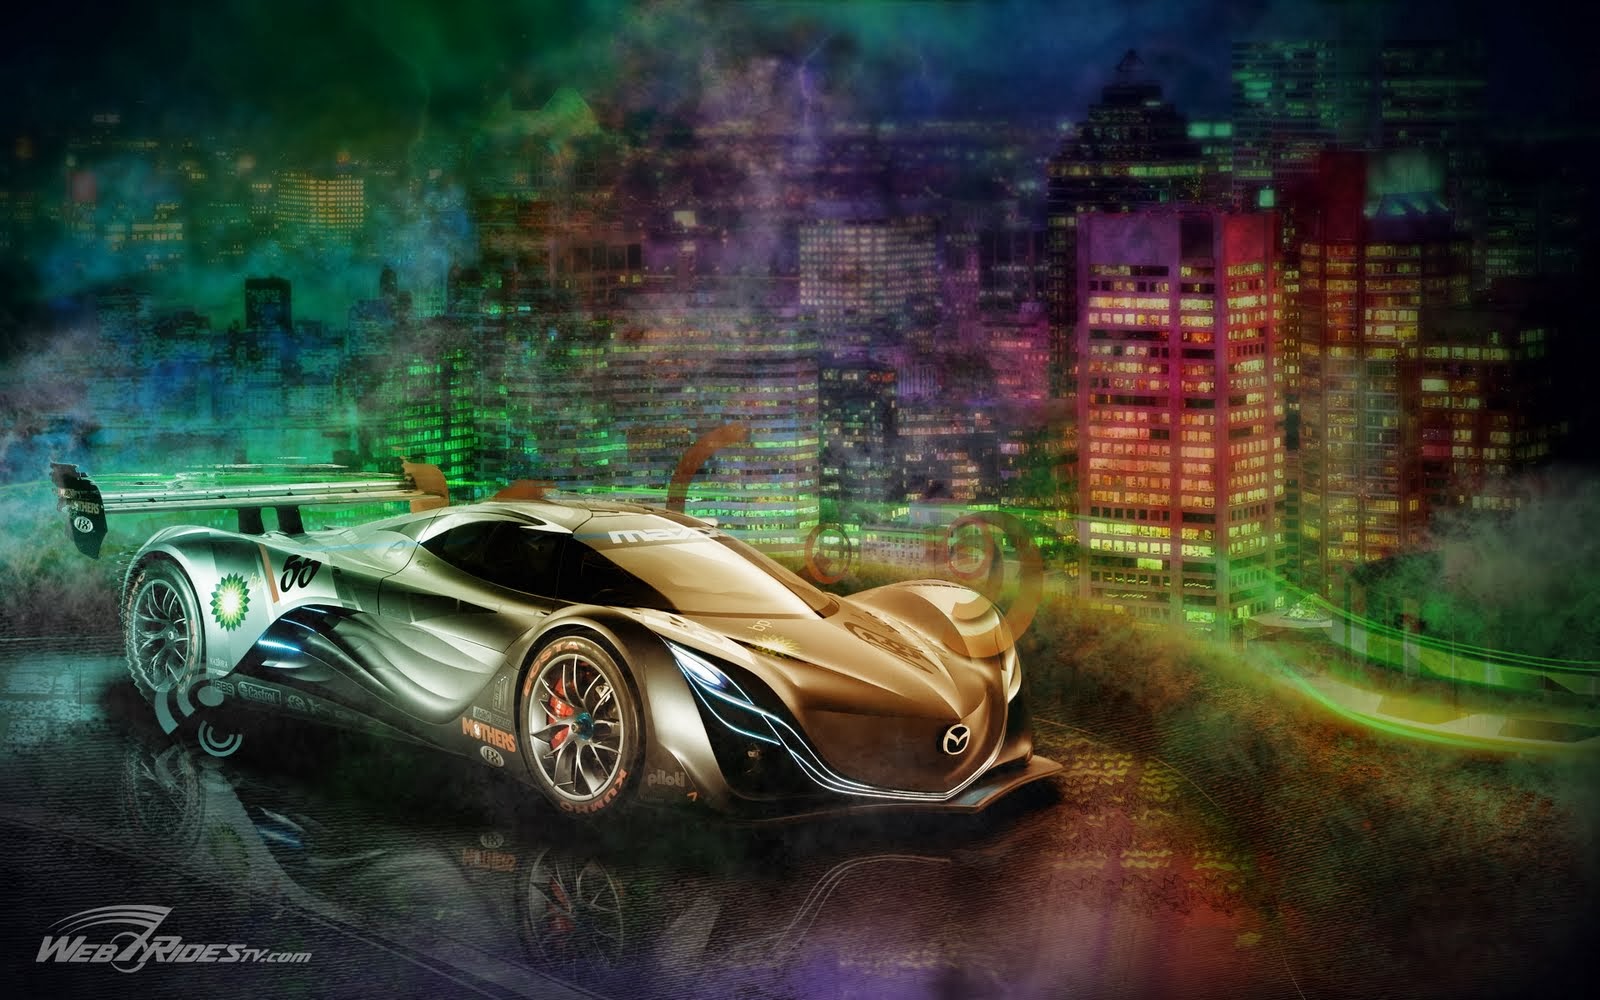 http://www.crazywallpapers.in/2014/02/cars-hd-best-wallpapers.html